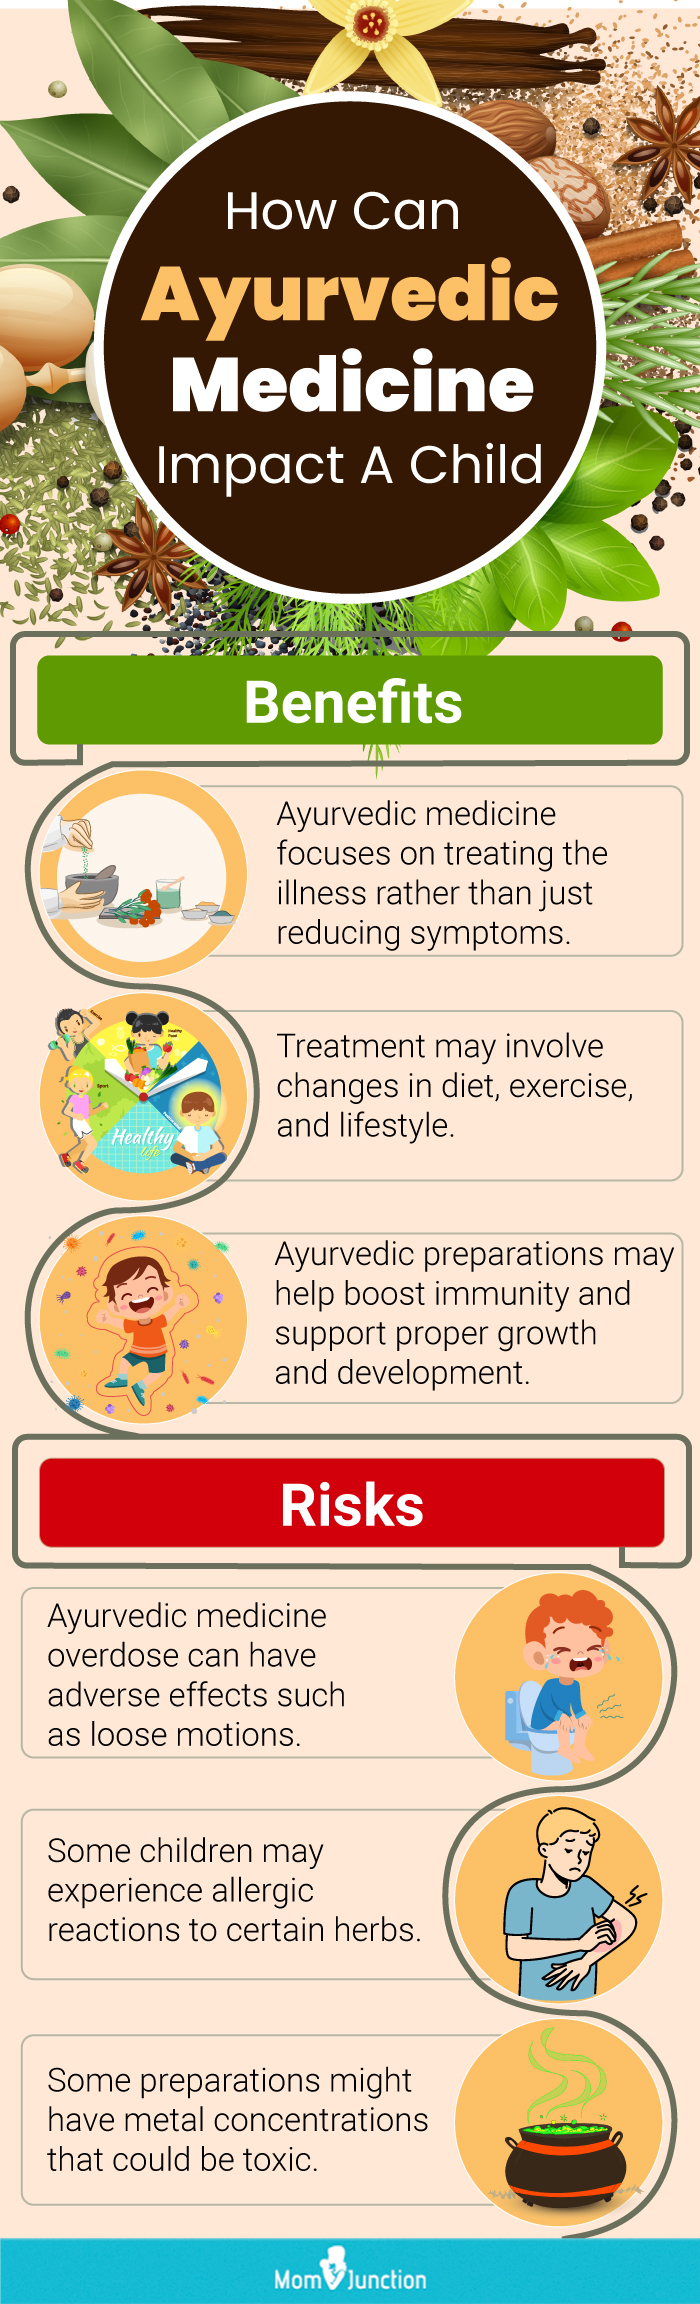 how can ayurvedic medicine impact a child (infographic)